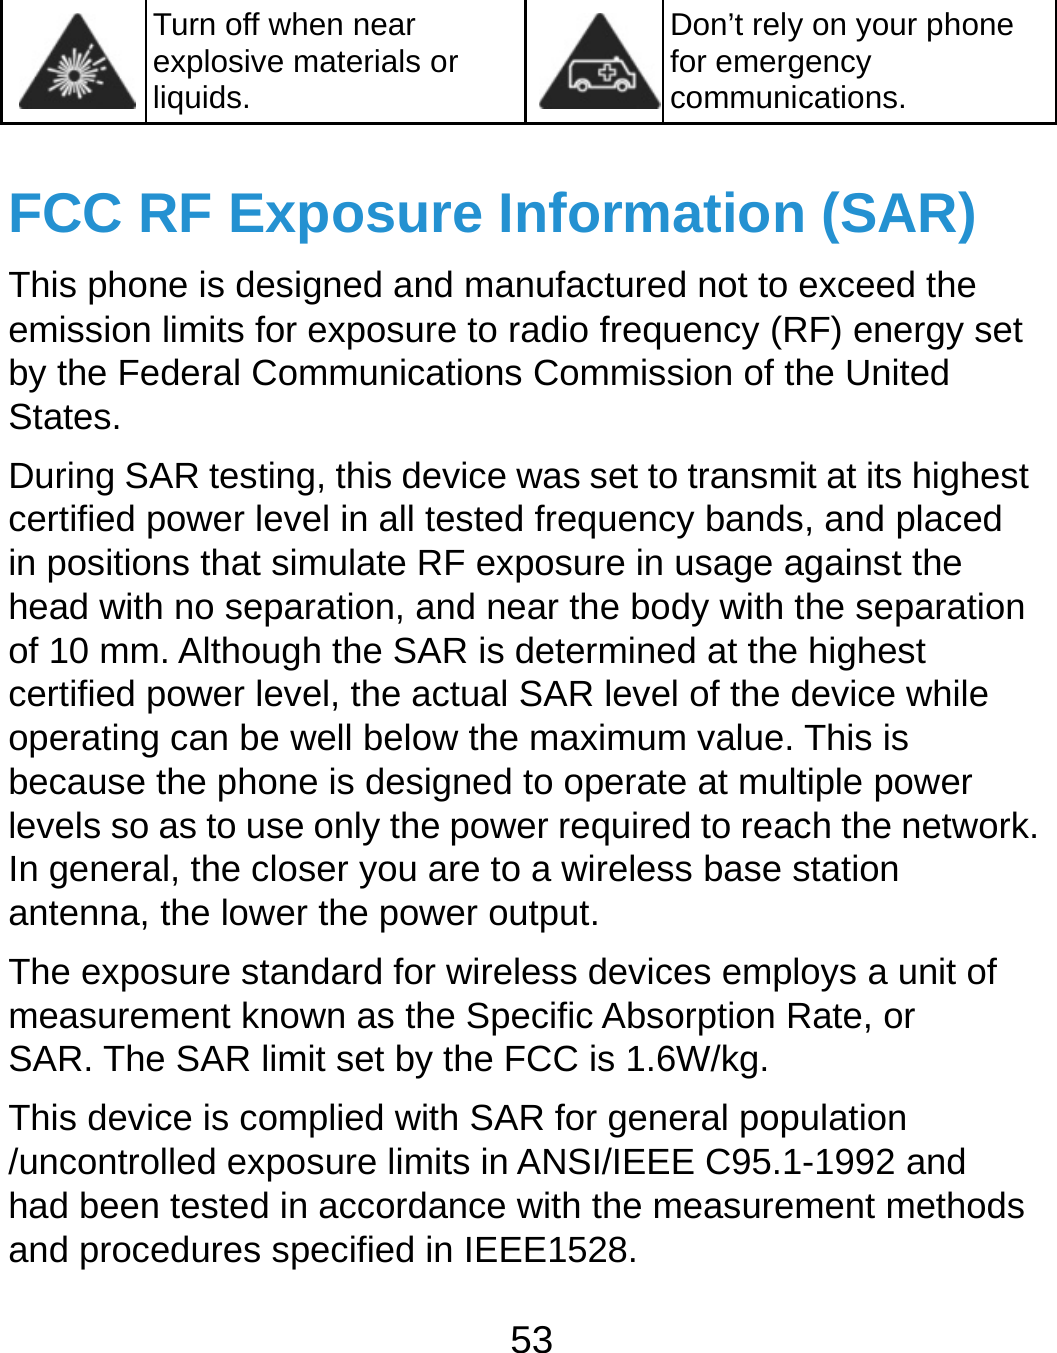  53  Turn off when near explosive materials or liquids. Don’t rely on your phone for emergency communications.  FCC RF Exposure Information (SAR) This phone is designed and manufactured not to exceed the emission limits for exposure to radio frequency (RF) energy set by the Federal Communications Commission of the United States. During SAR testing, this device was set to transmit at its highest certified power level in all tested frequency bands, and placed in positions that simulate RF exposure in usage against the head with no separation, and near the body with the separation of 10 mm. Although the SAR is determined at the highest certified power level, the actual SAR level of the device while operating can be well below the maximum value. This is because the phone is designed to operate at multiple power levels so as to use only the power required to reach the network. In general, the closer you are to a wireless base station antenna, the lower the power output. The exposure standard for wireless devices employs a unit of measurement known as the Specific Absorption Rate, or SAR. The SAR limit set by the FCC is 1.6W/kg. This device is complied with SAR for general population /uncontrolled exposure limits in ANSI/IEEE C95.1-1992 and had been tested in accordance with the measurement methods and procedures specified in IEEE1528. 